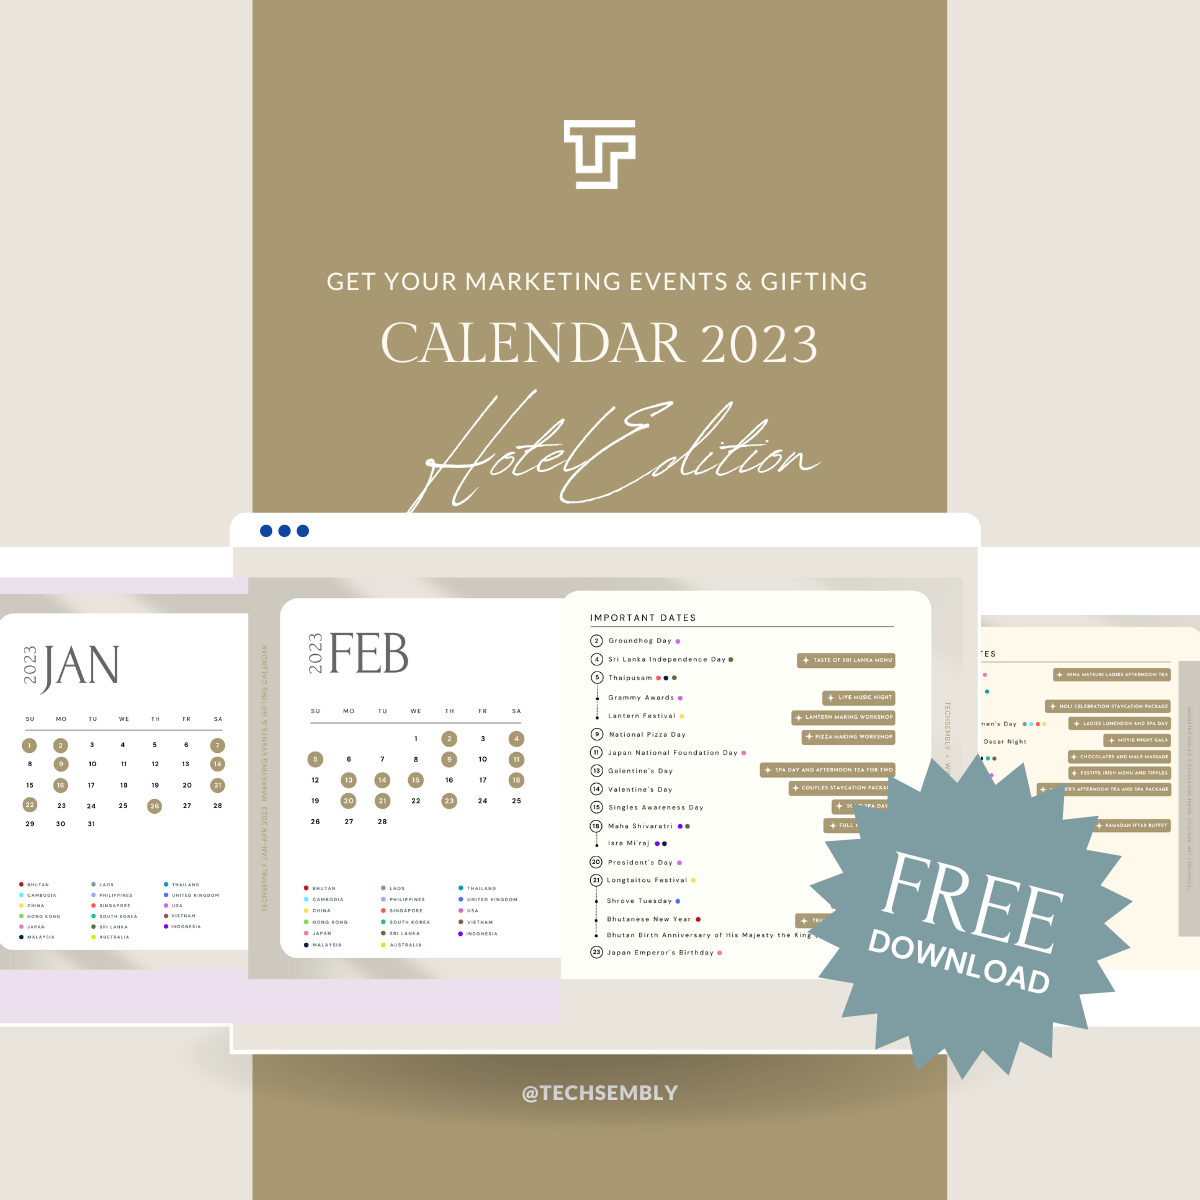 Free Marketing Events and Gifting Calendar Download for Hotels H1 2023